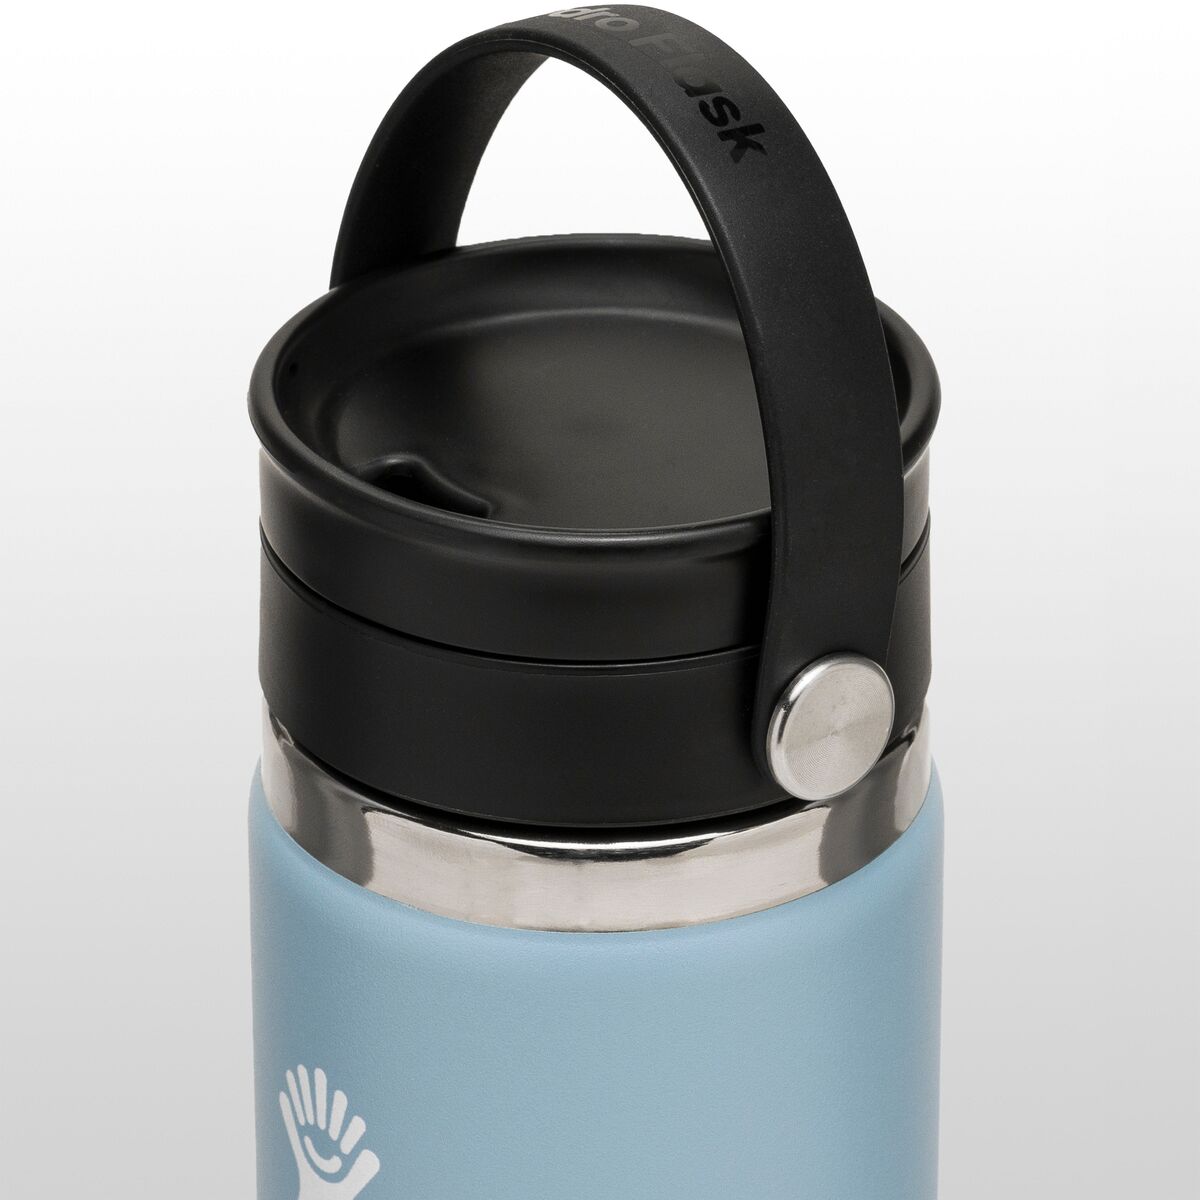  Hydro Flask 16 oz Travel Coffee Flask, Stainless Steel &  Vacuum Insulated, Wide Mouth with Hydro Flip Cap